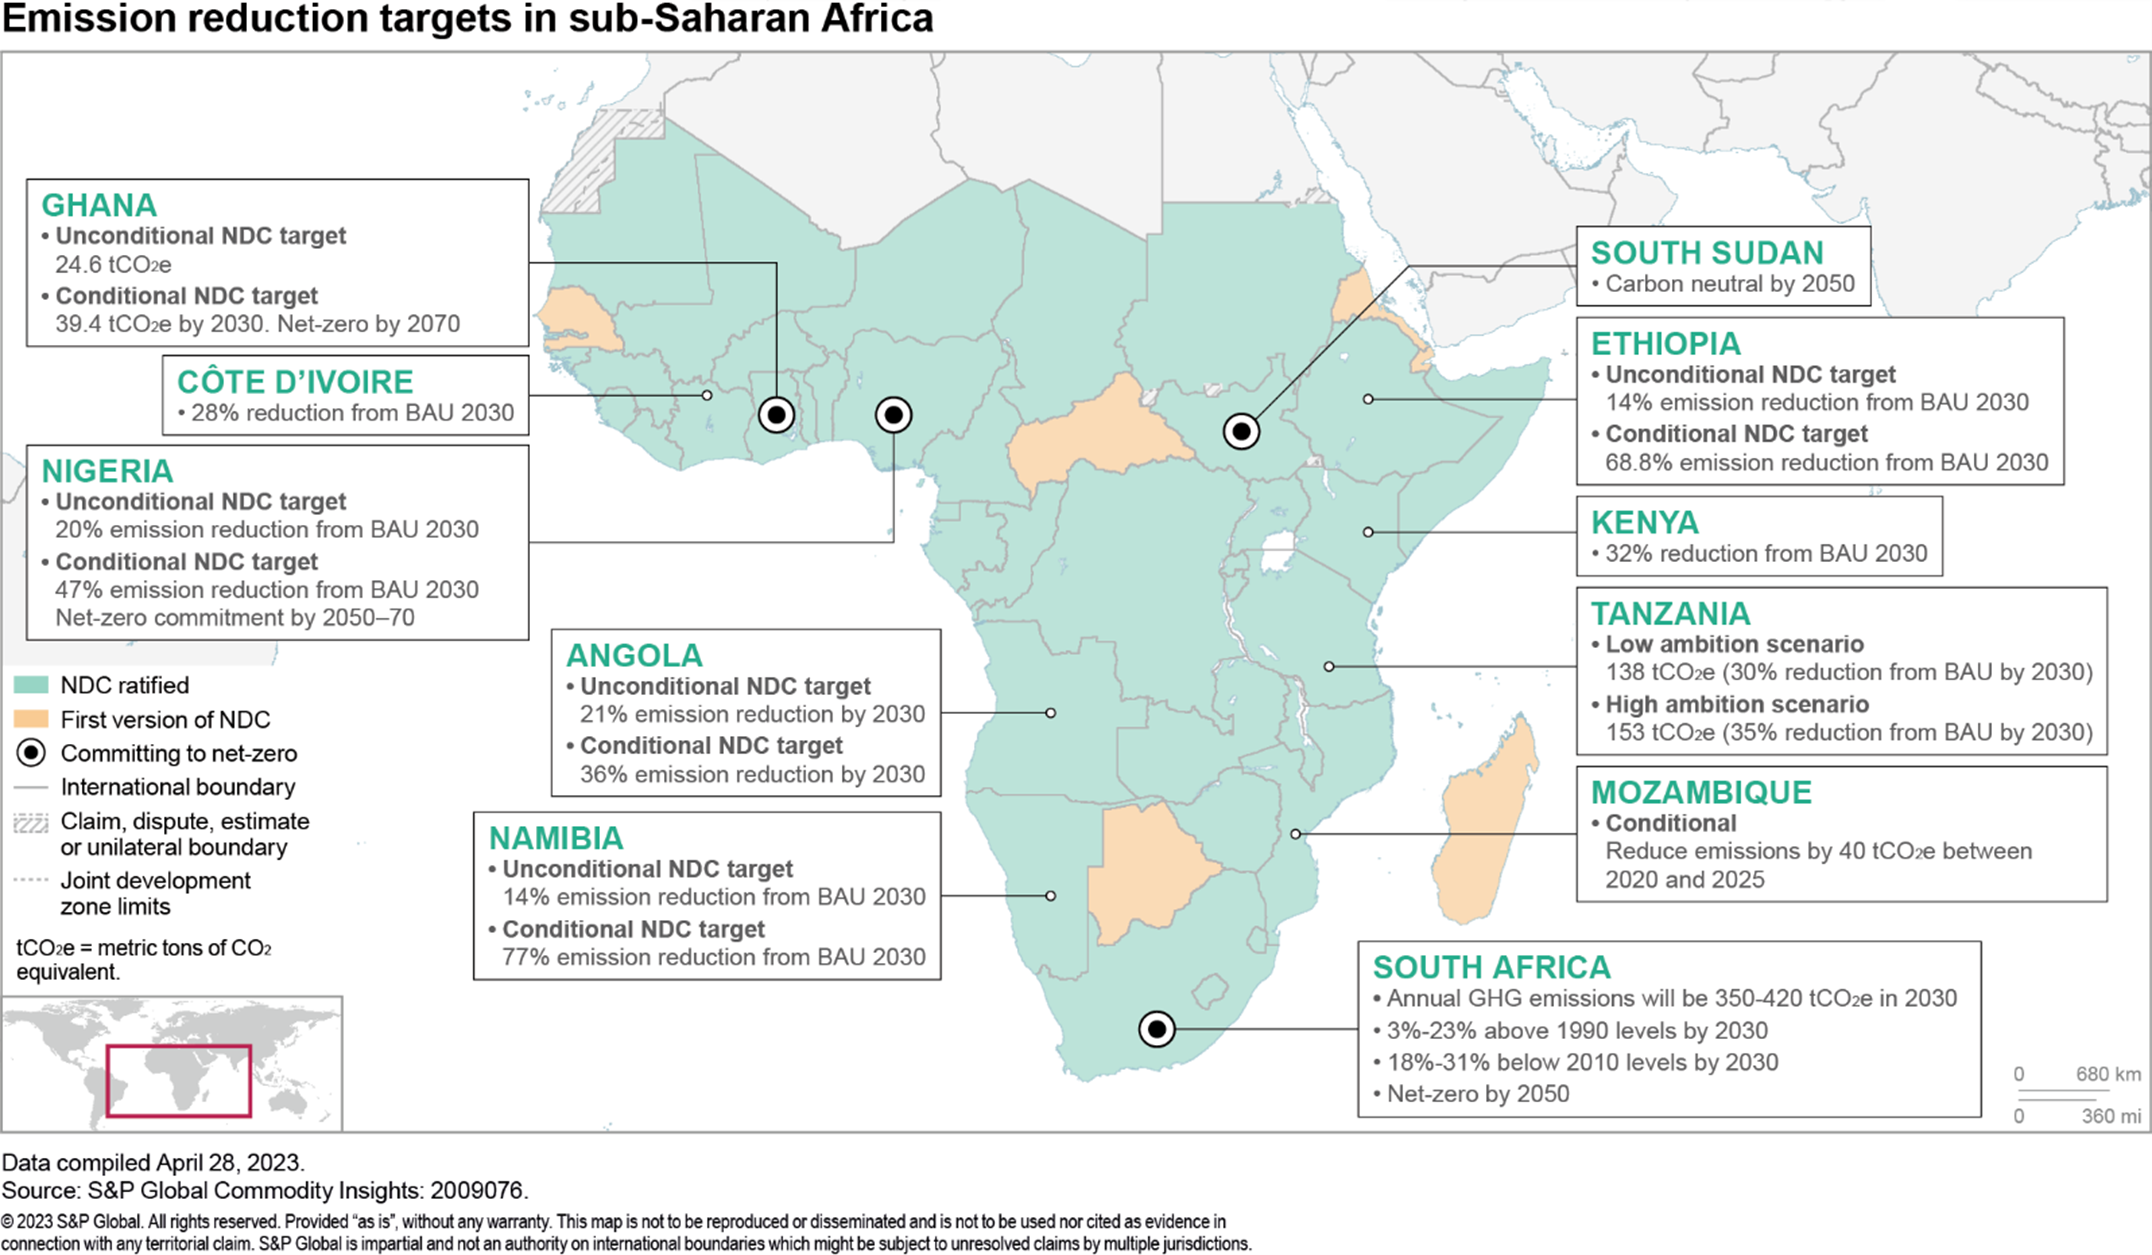 Emissions reduction targets in sub-Saharan Africa